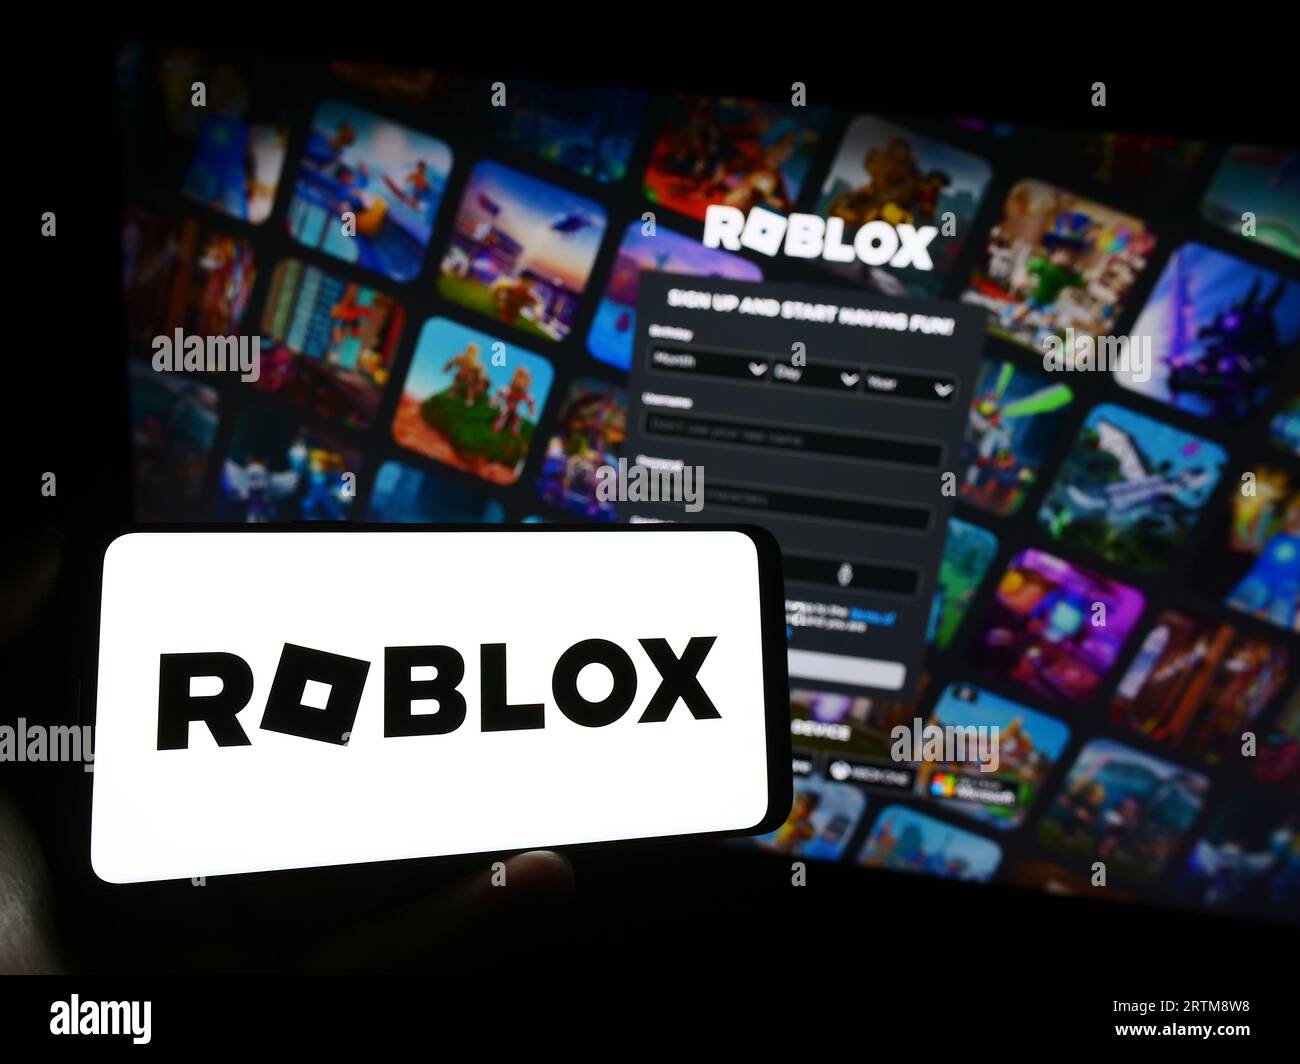 👨‍💻 Game Company Tycoon - Roblox